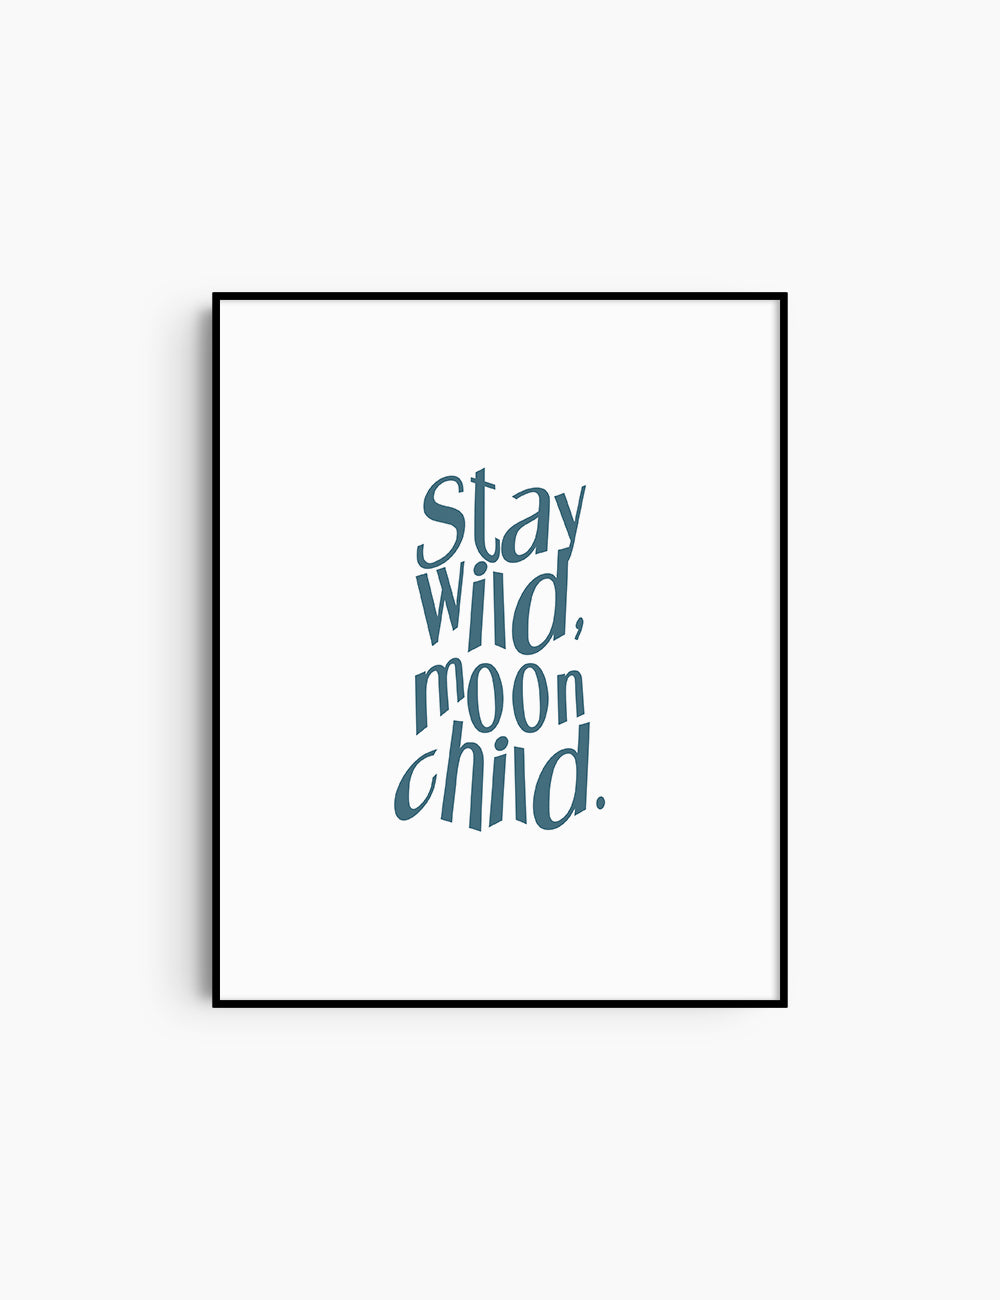 STAY WILD, MOON CHILD. Blue and White. Printable Wall Art Quote.